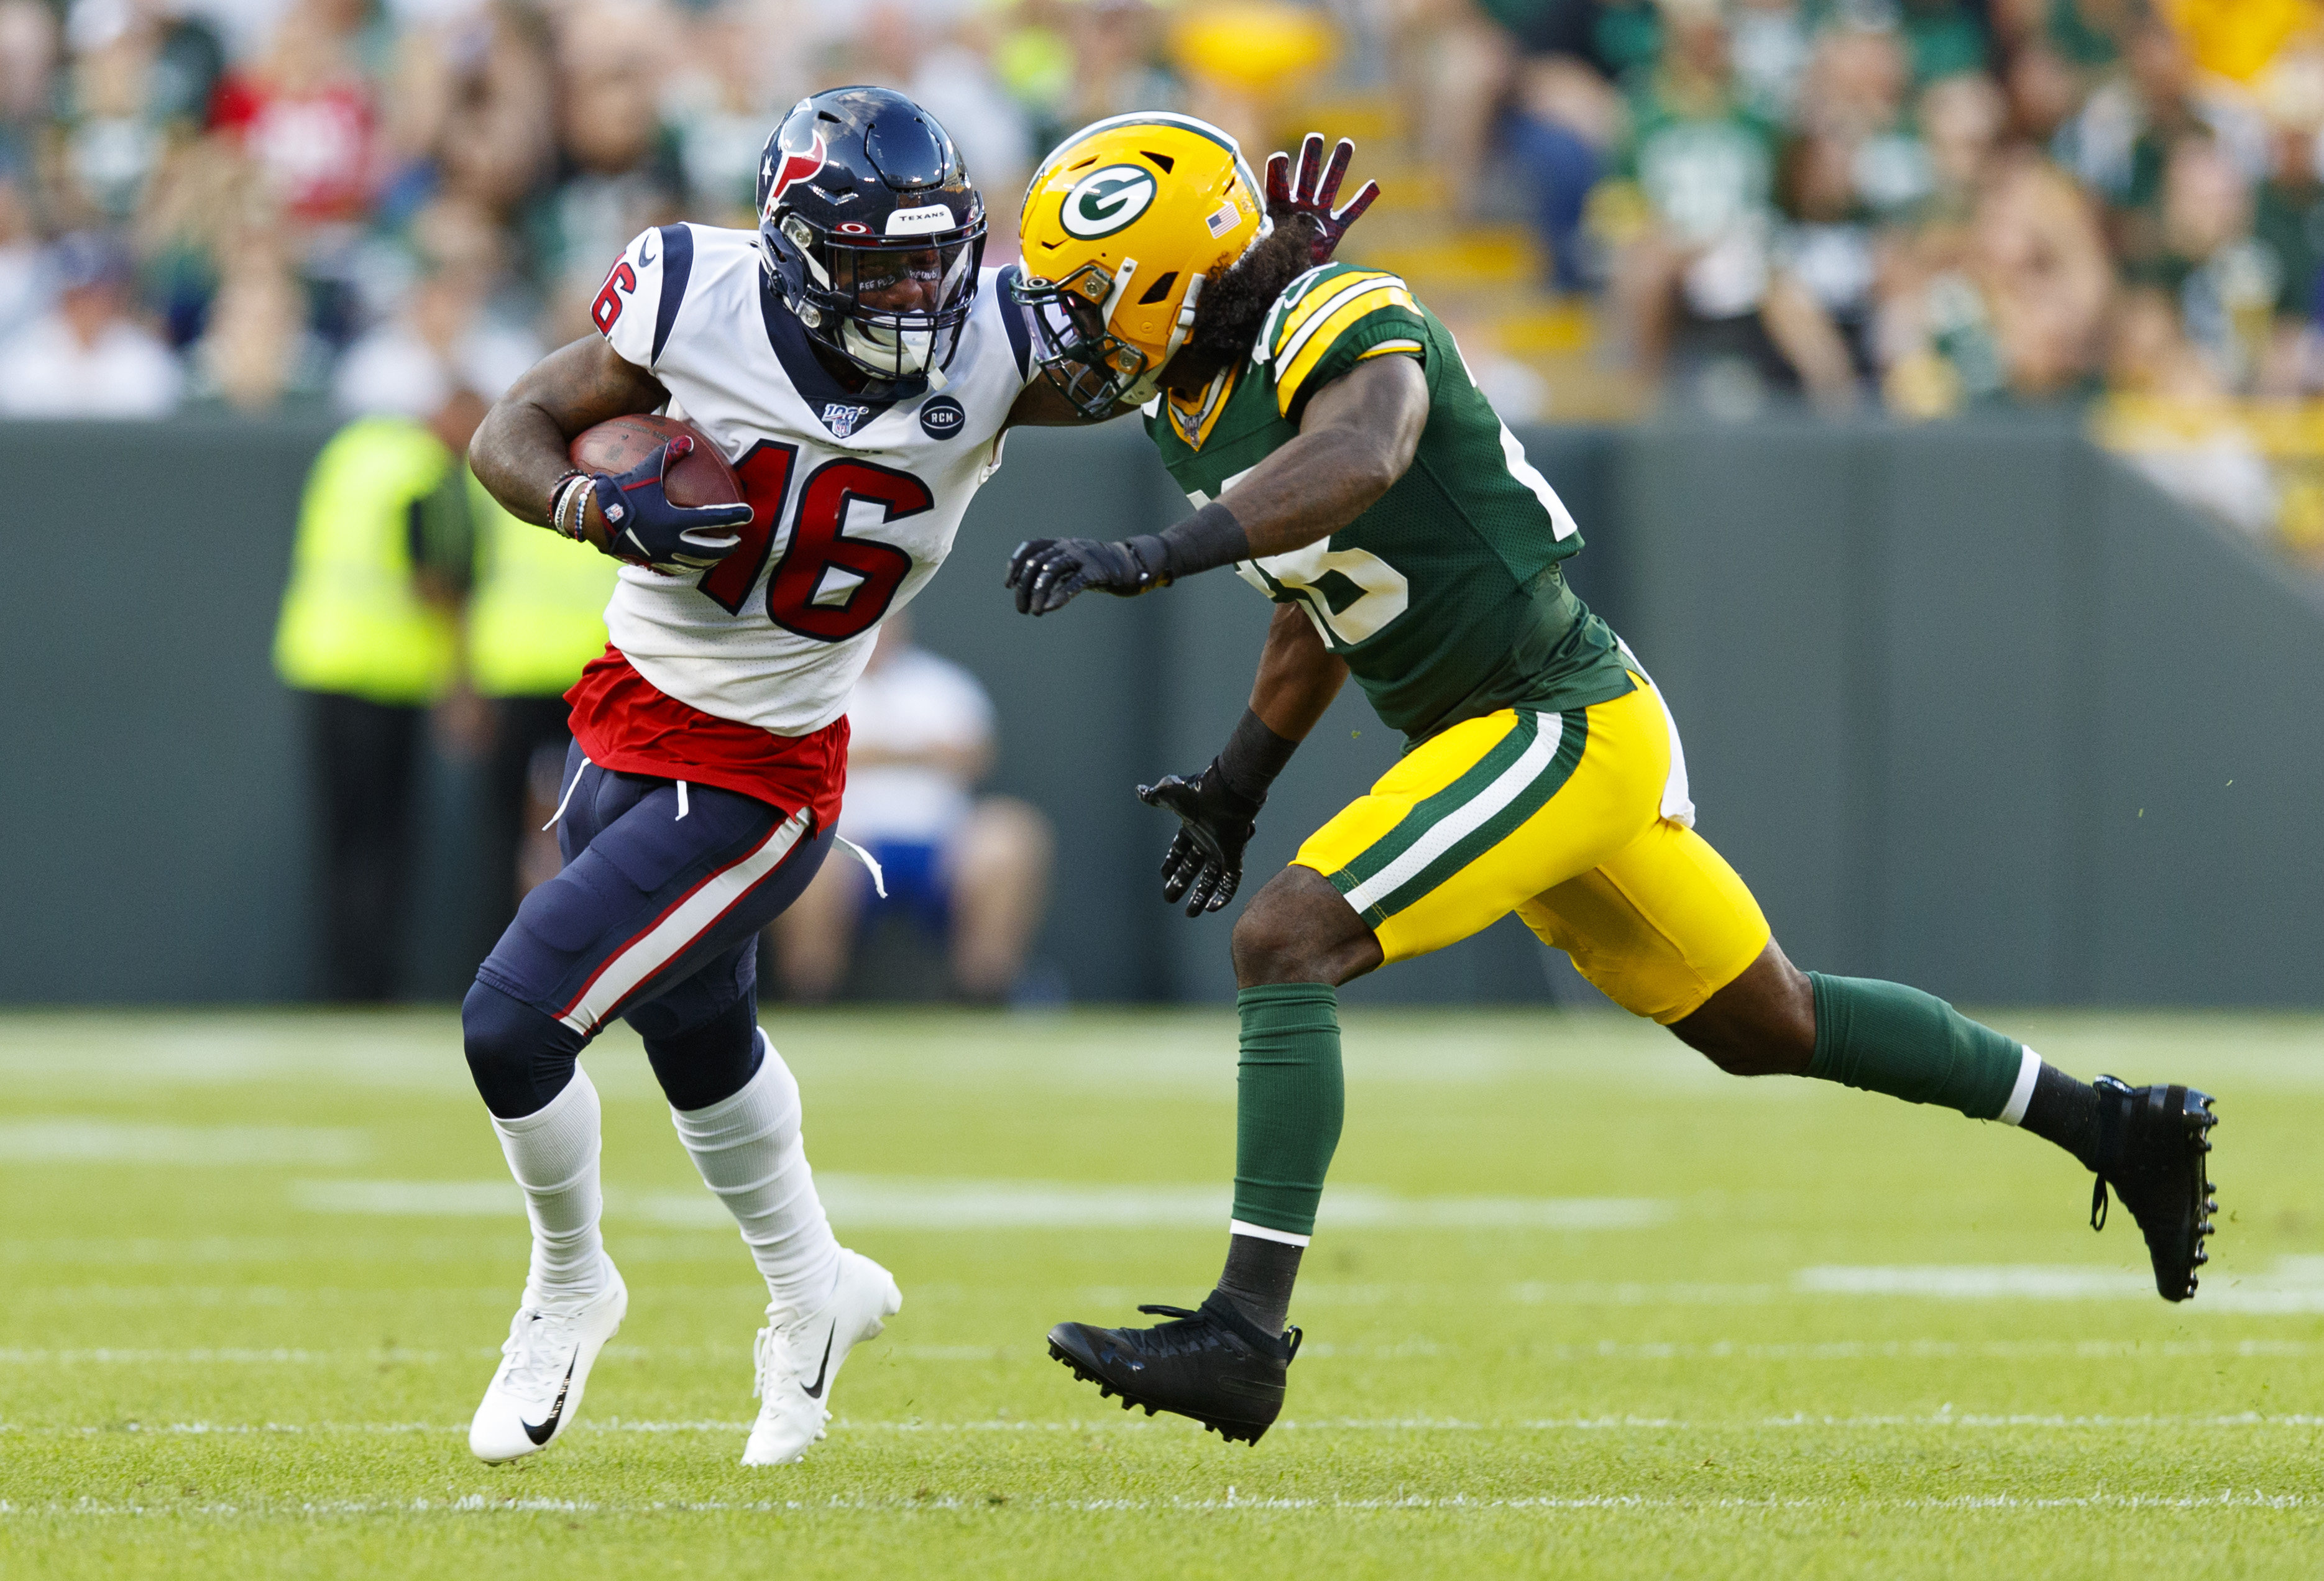 PHOTOS: Houston drops preseason opener 28-26 to the Packers in Green Bay